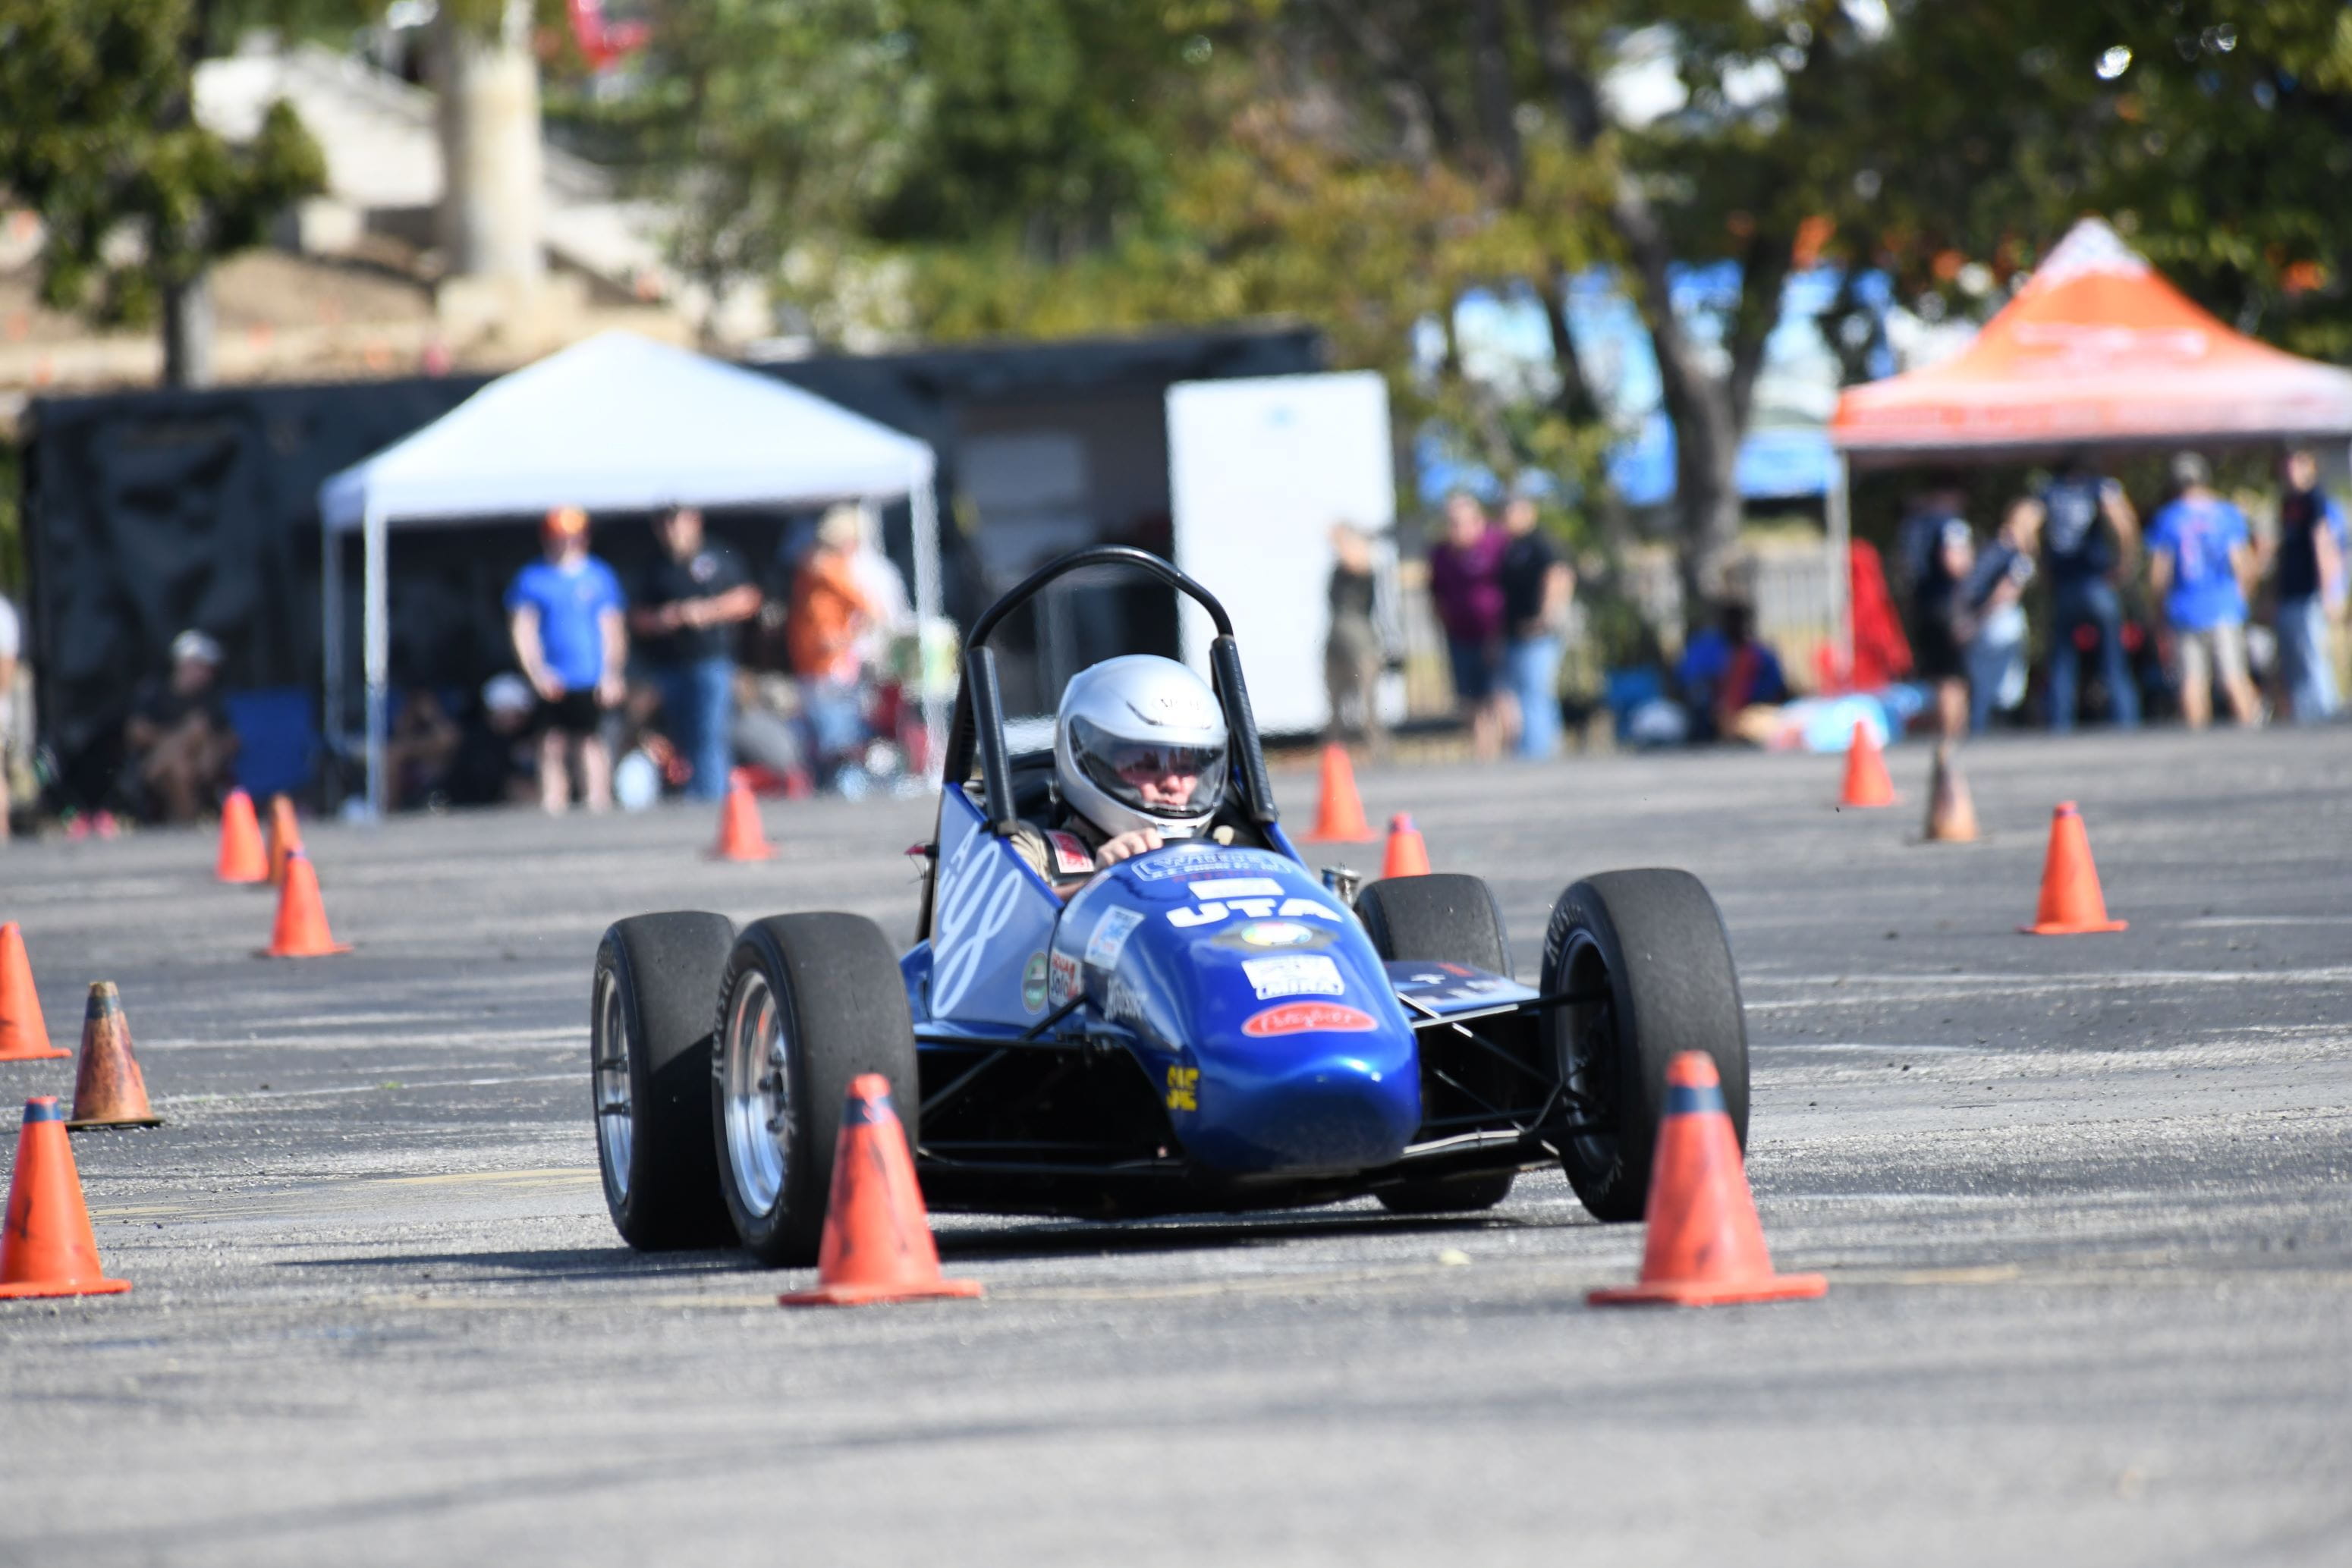 <p>The Texas Autocross will be Oct. 7-8" _languageinserted="true